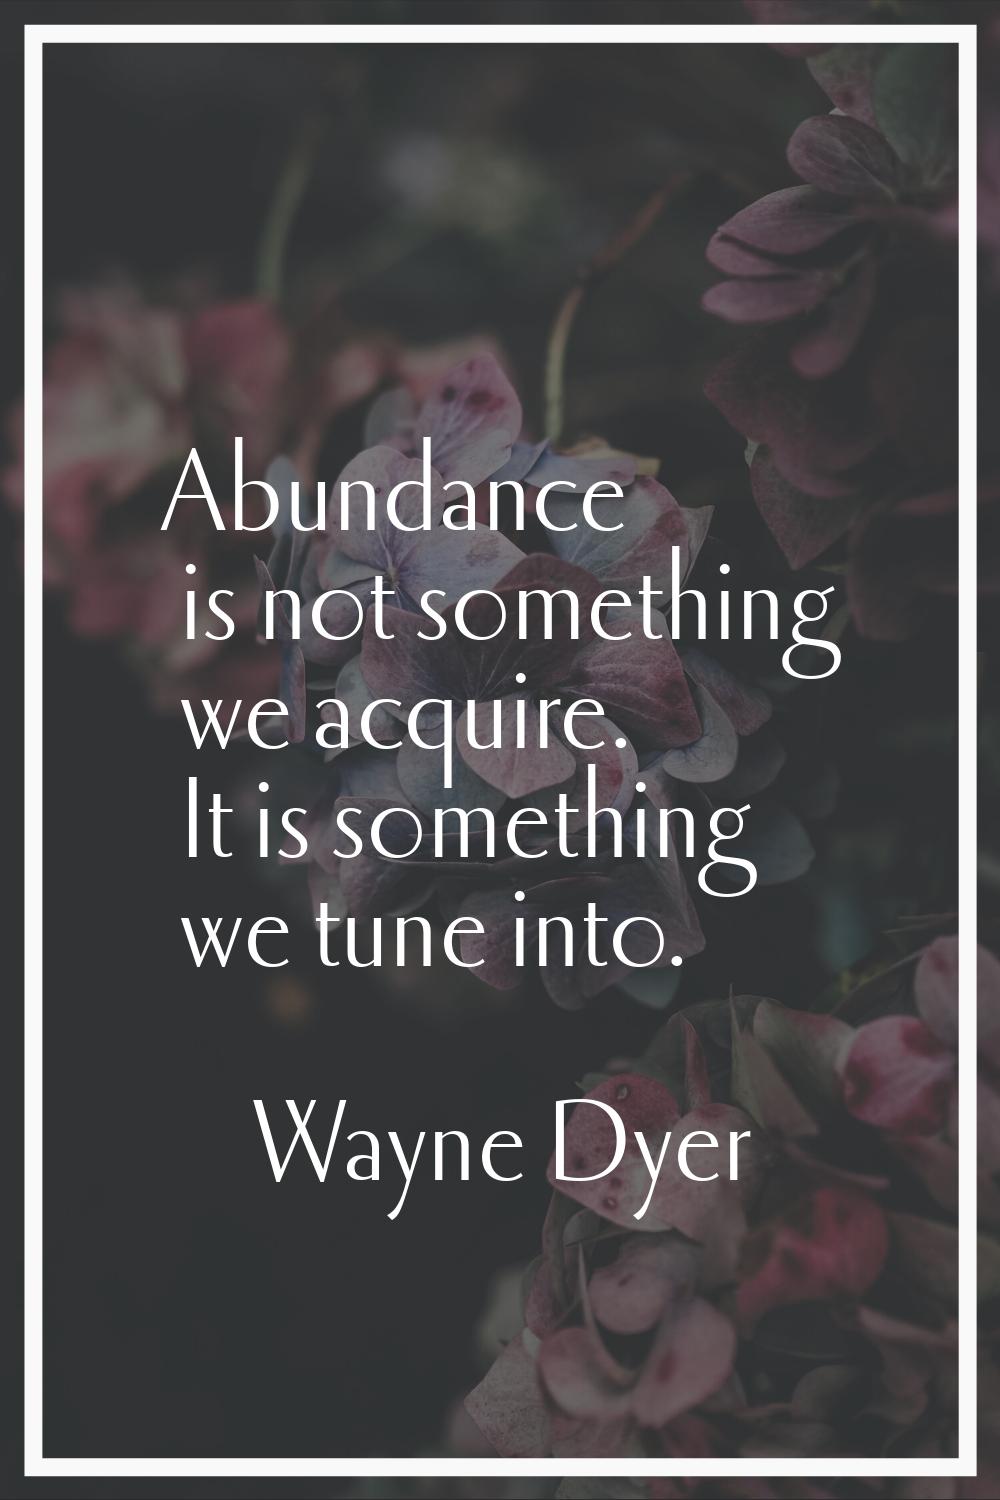 Abundance is not something we acquire. It is something we tune into.